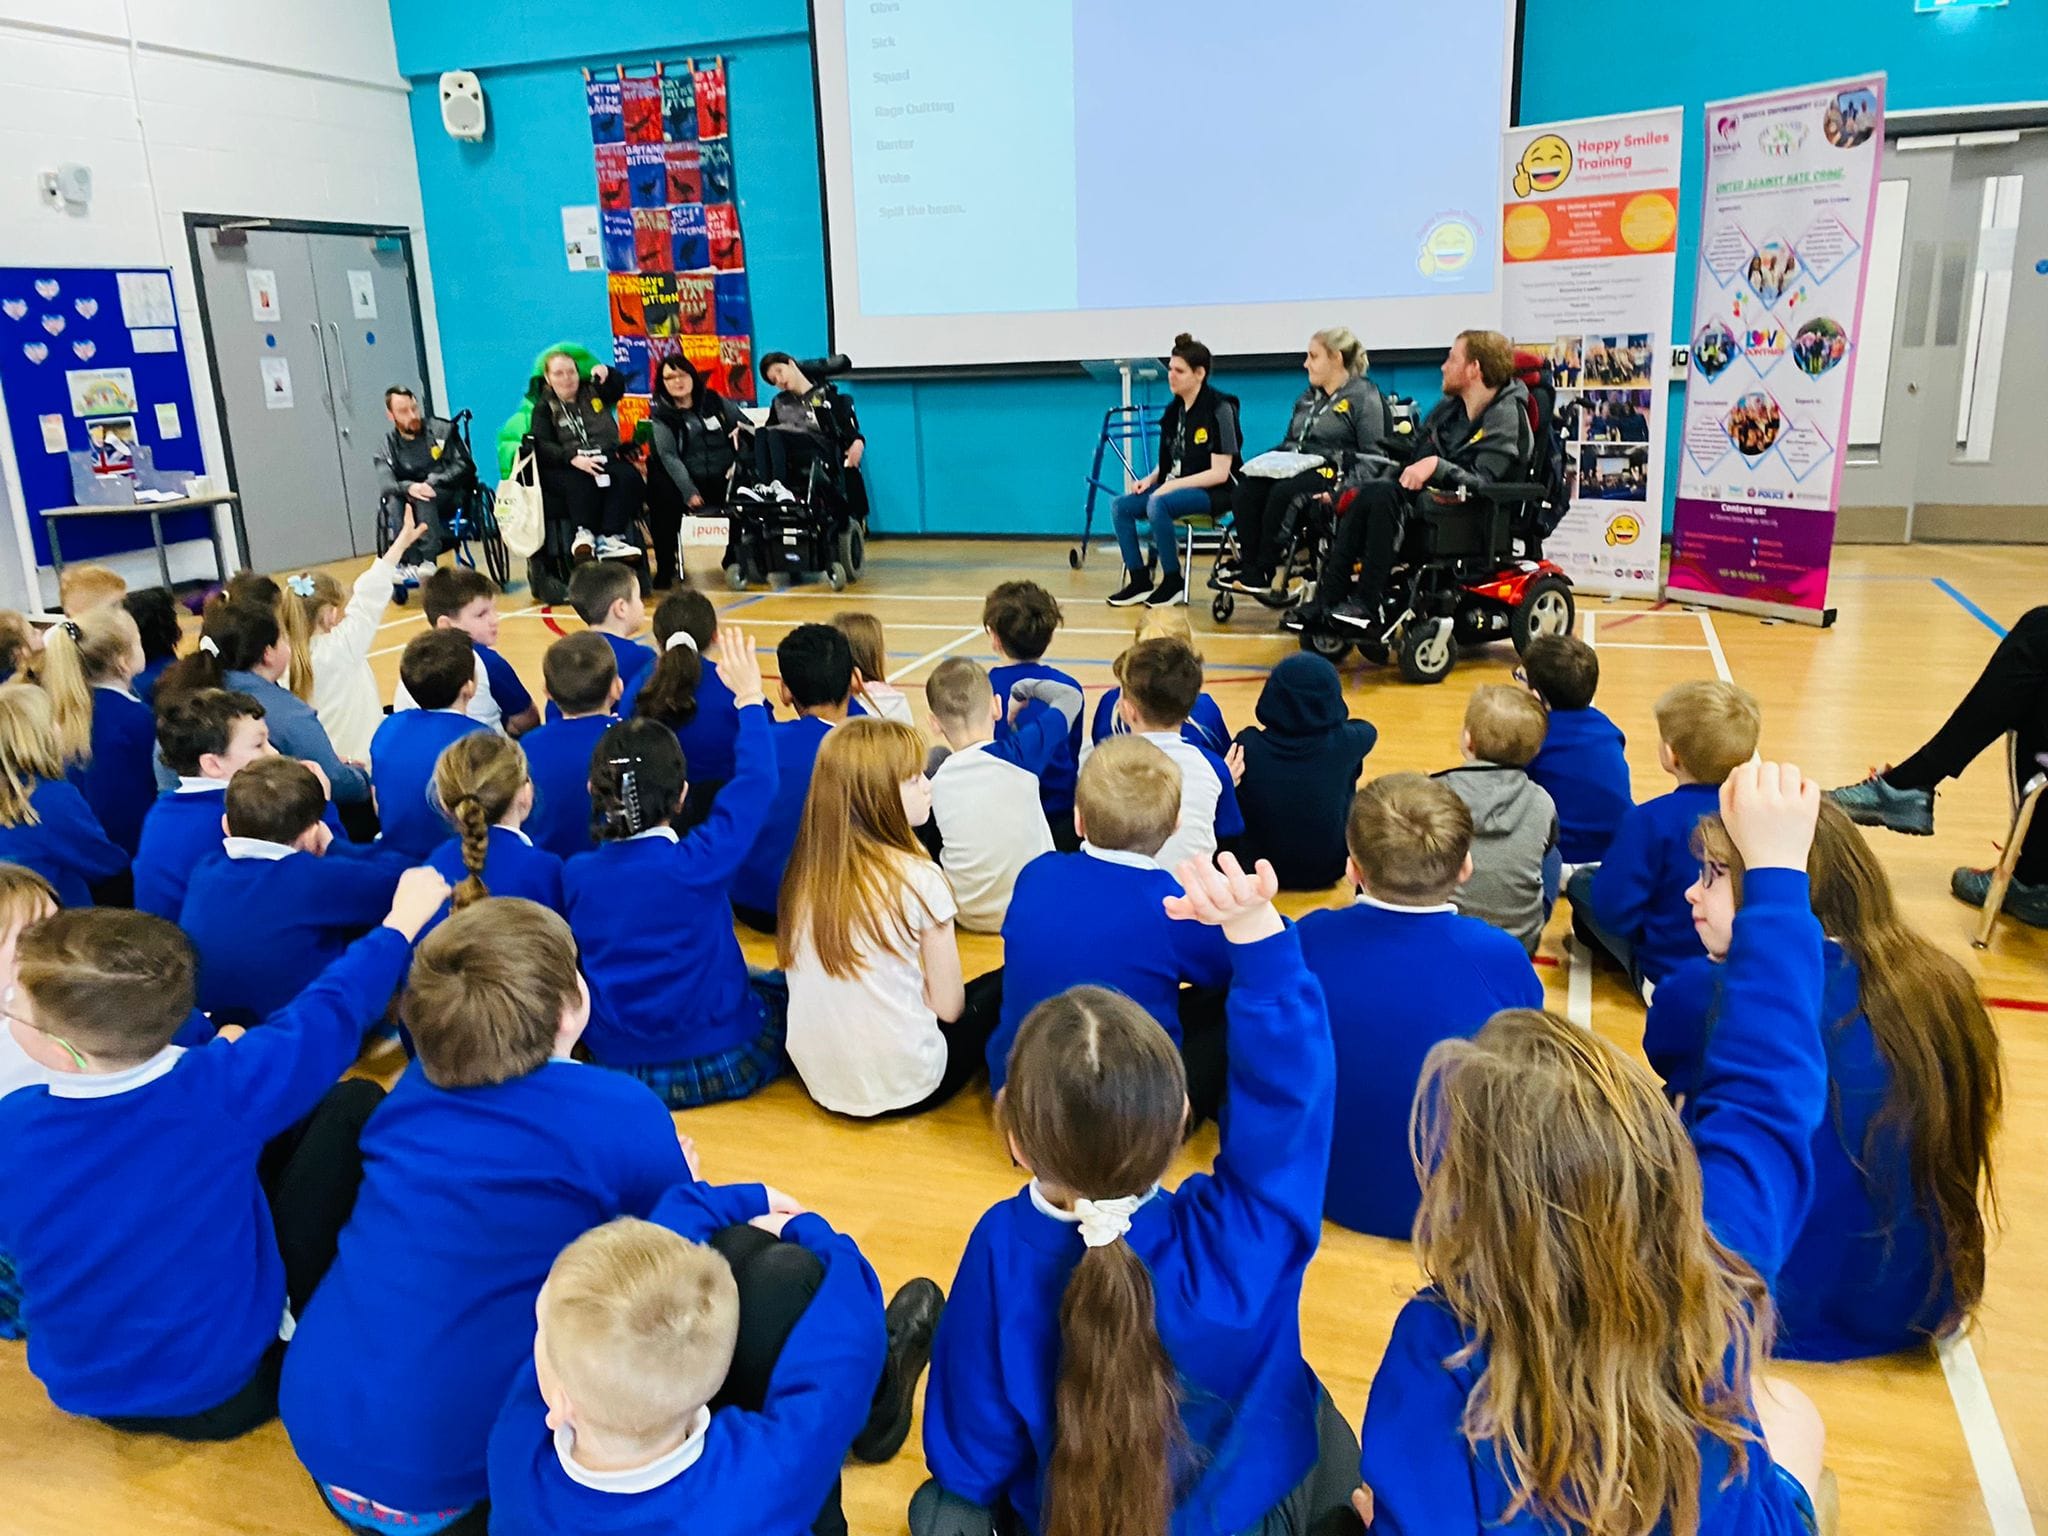 A class of school pupils listening to members of the Happy Smiles team, with some raising their hands.